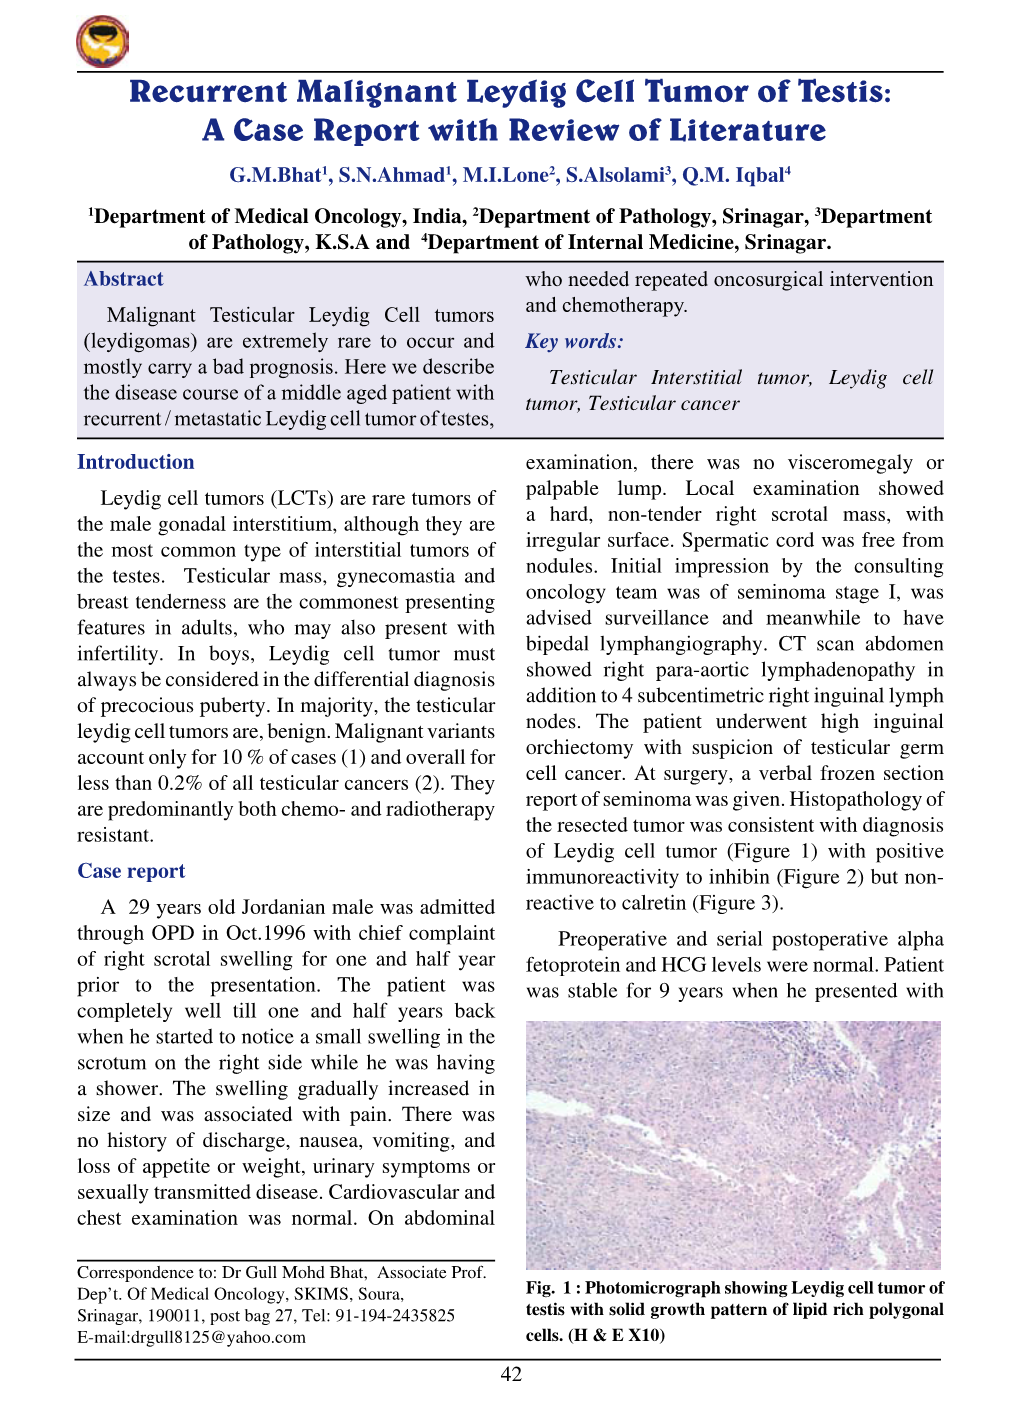 Recurrent Malignant Leydig Cell Tumor of Testis: a Case Report with Review of Literature G.M.Bhat1, S.N.Ahmad1, M.I.Lone2, S.Alsolami3, Q.M